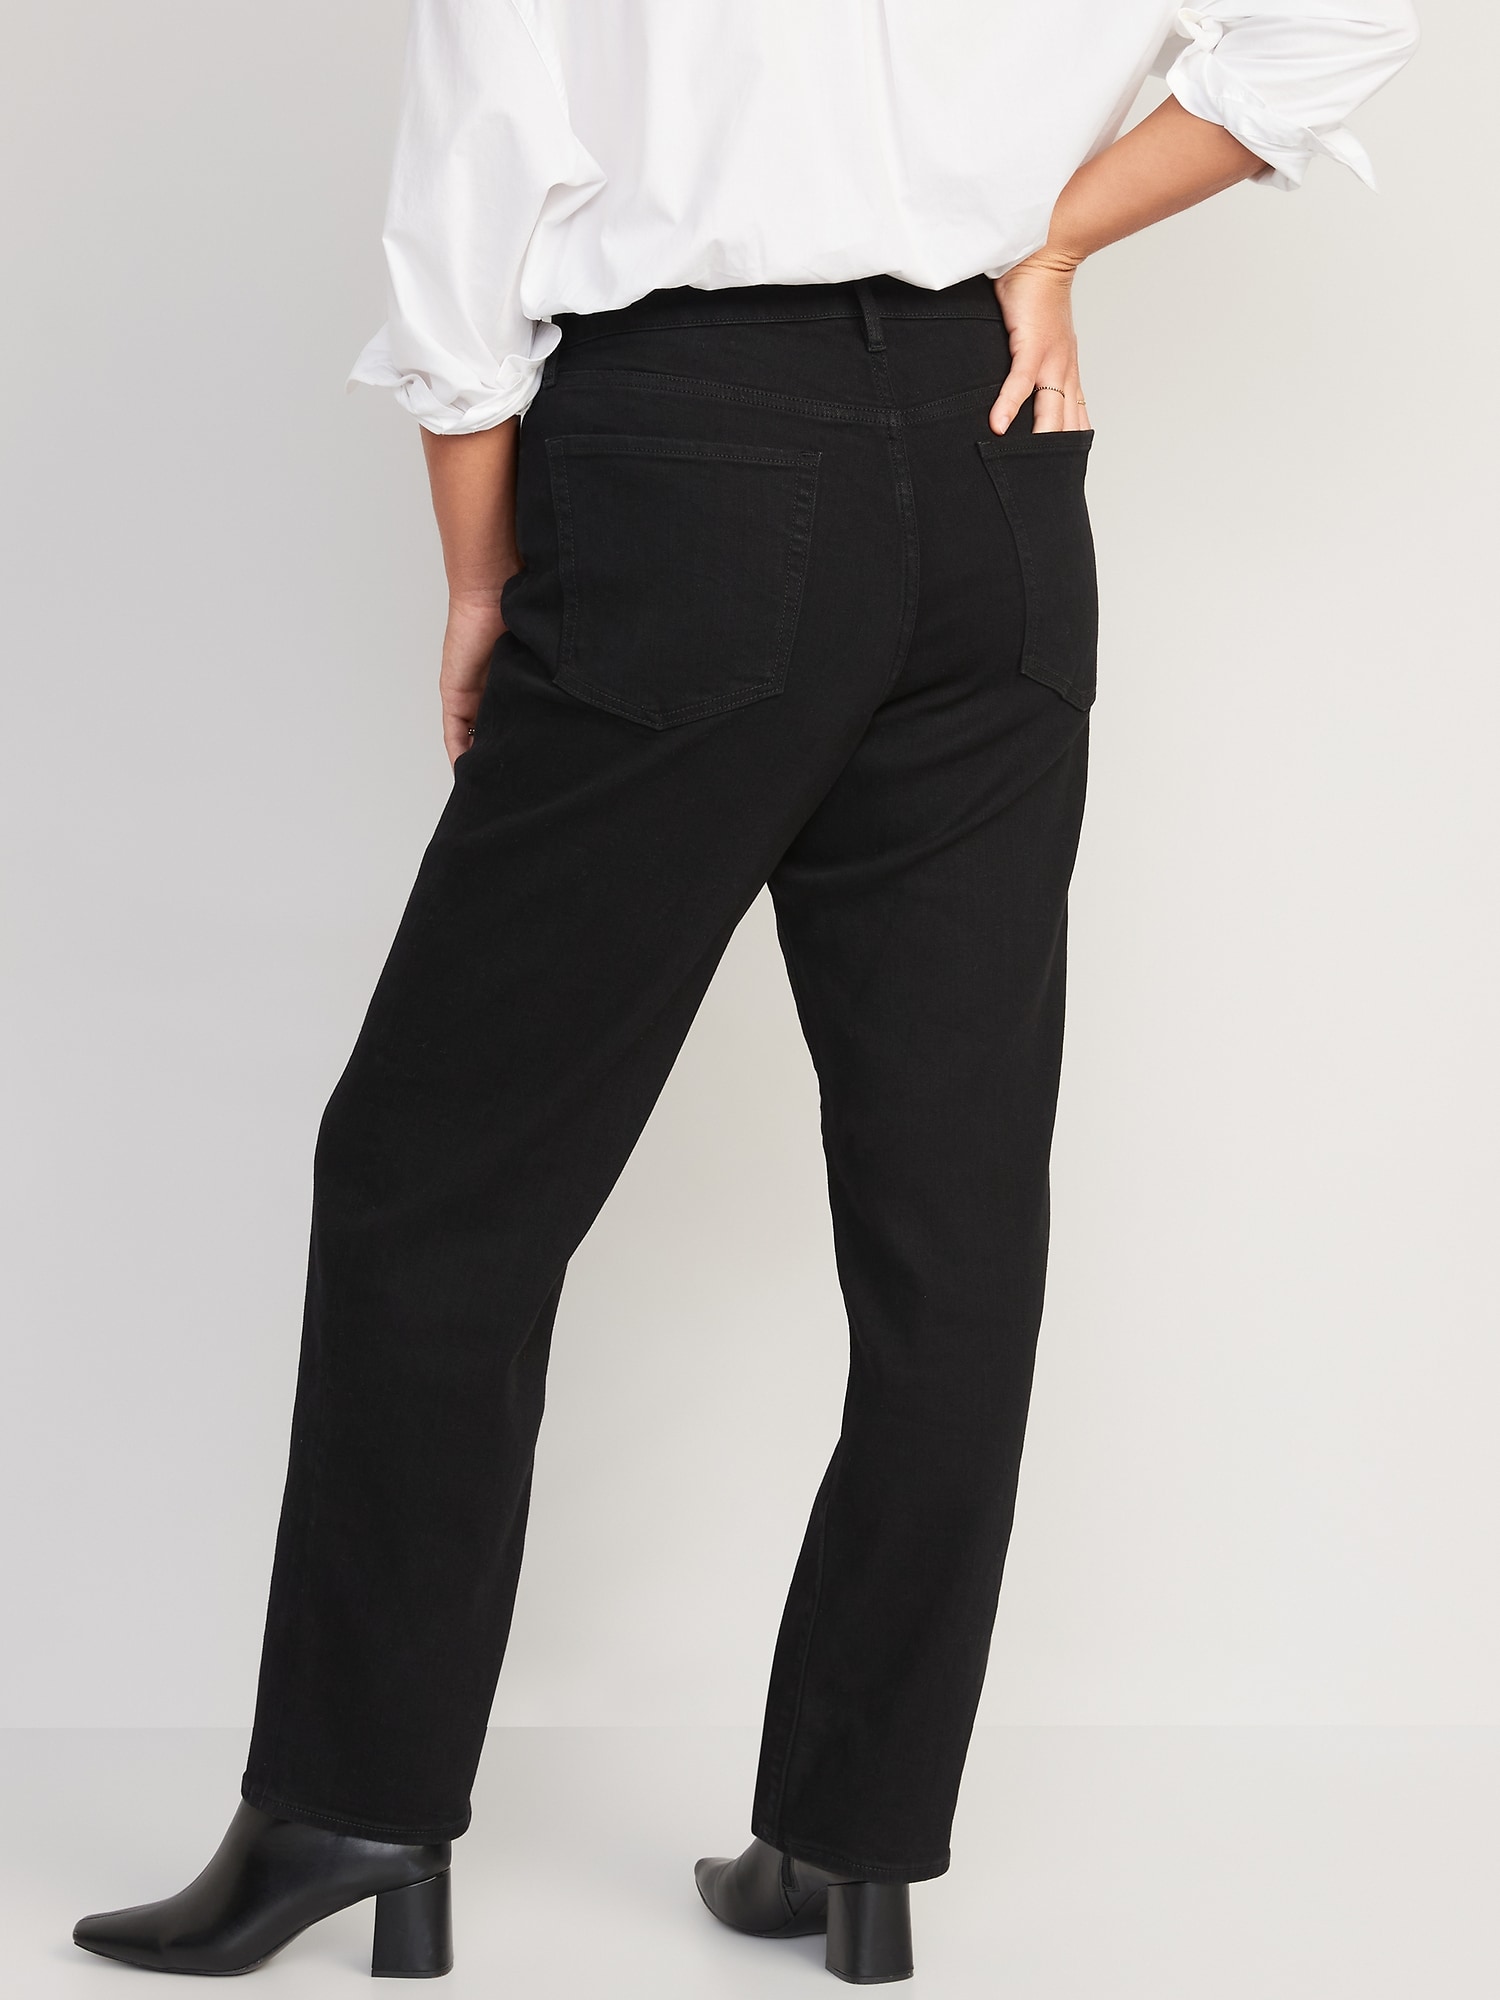 High-Waisted Wow Loose Black Jeans for Women | Old Navy